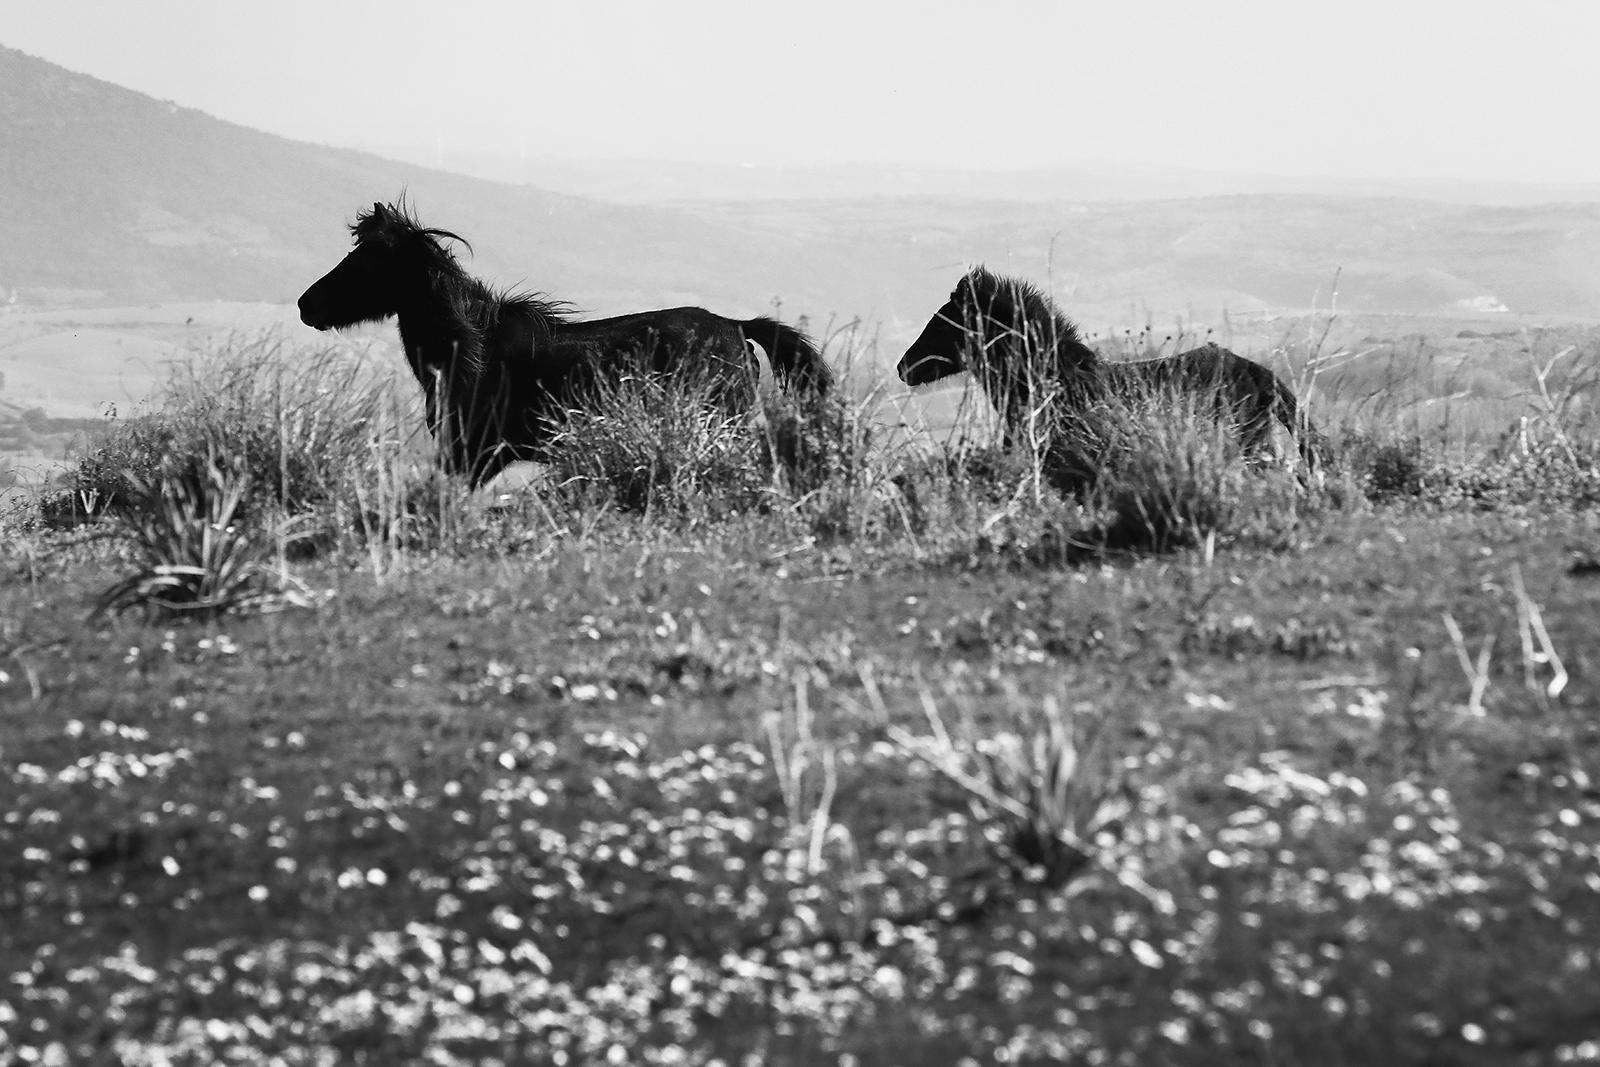 Cavallini 02 - Signed limited animal edition print, Black and white, wild horse - Contemporary Photograph by Laurent Campus